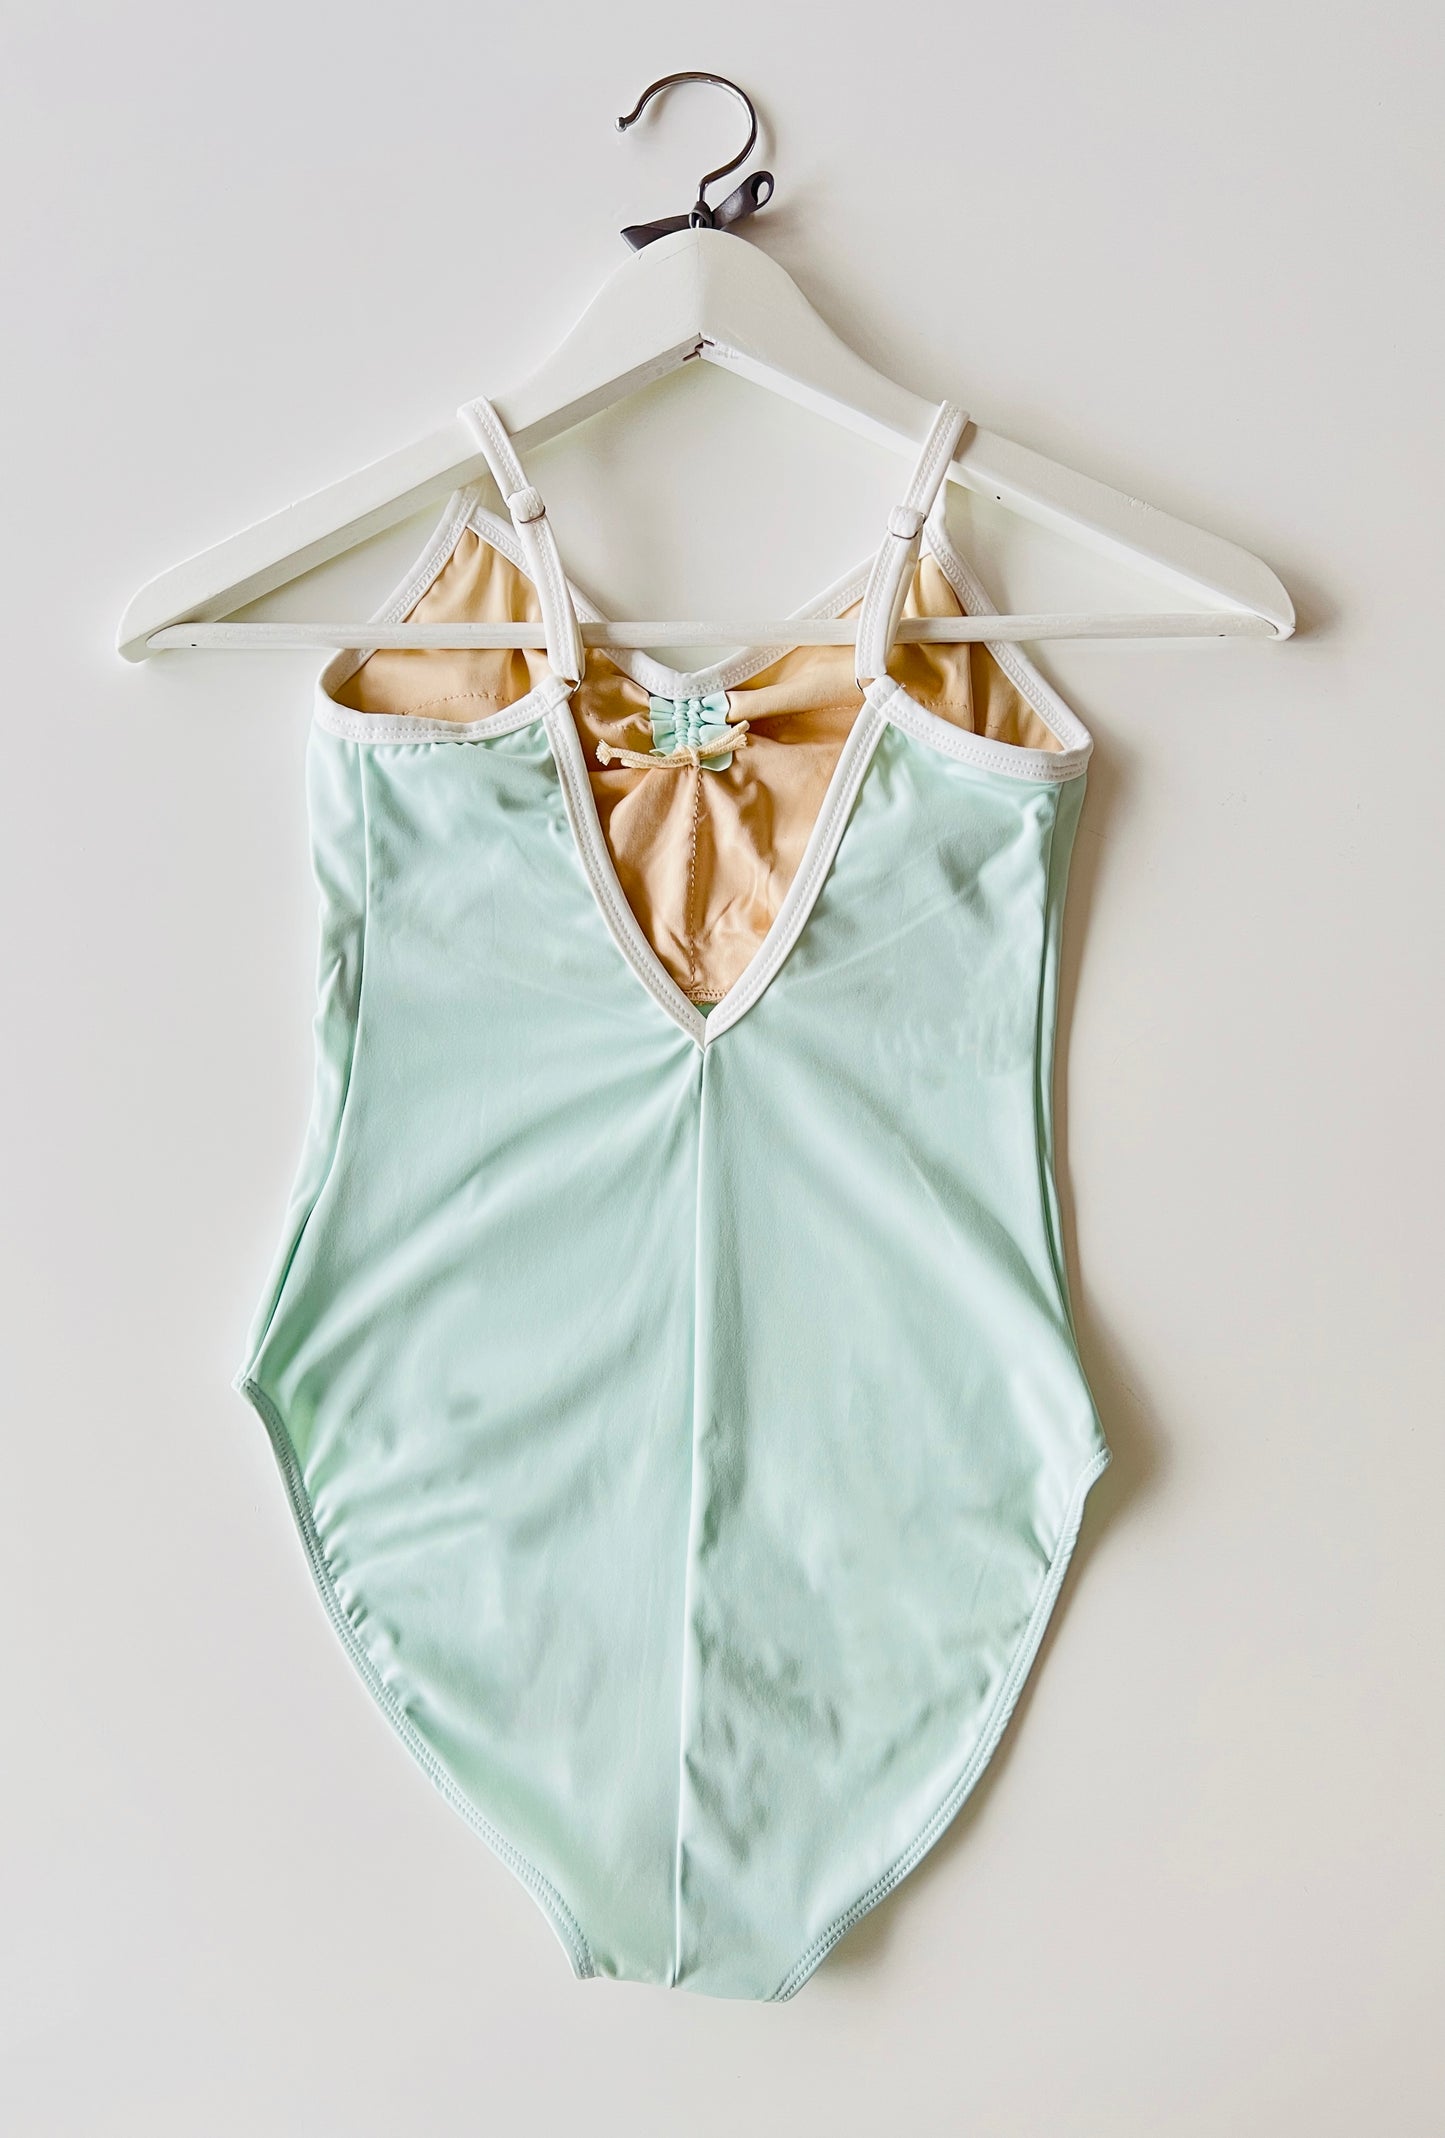 Camisole ballet leotard in mint green and white from The Collective Dancewear